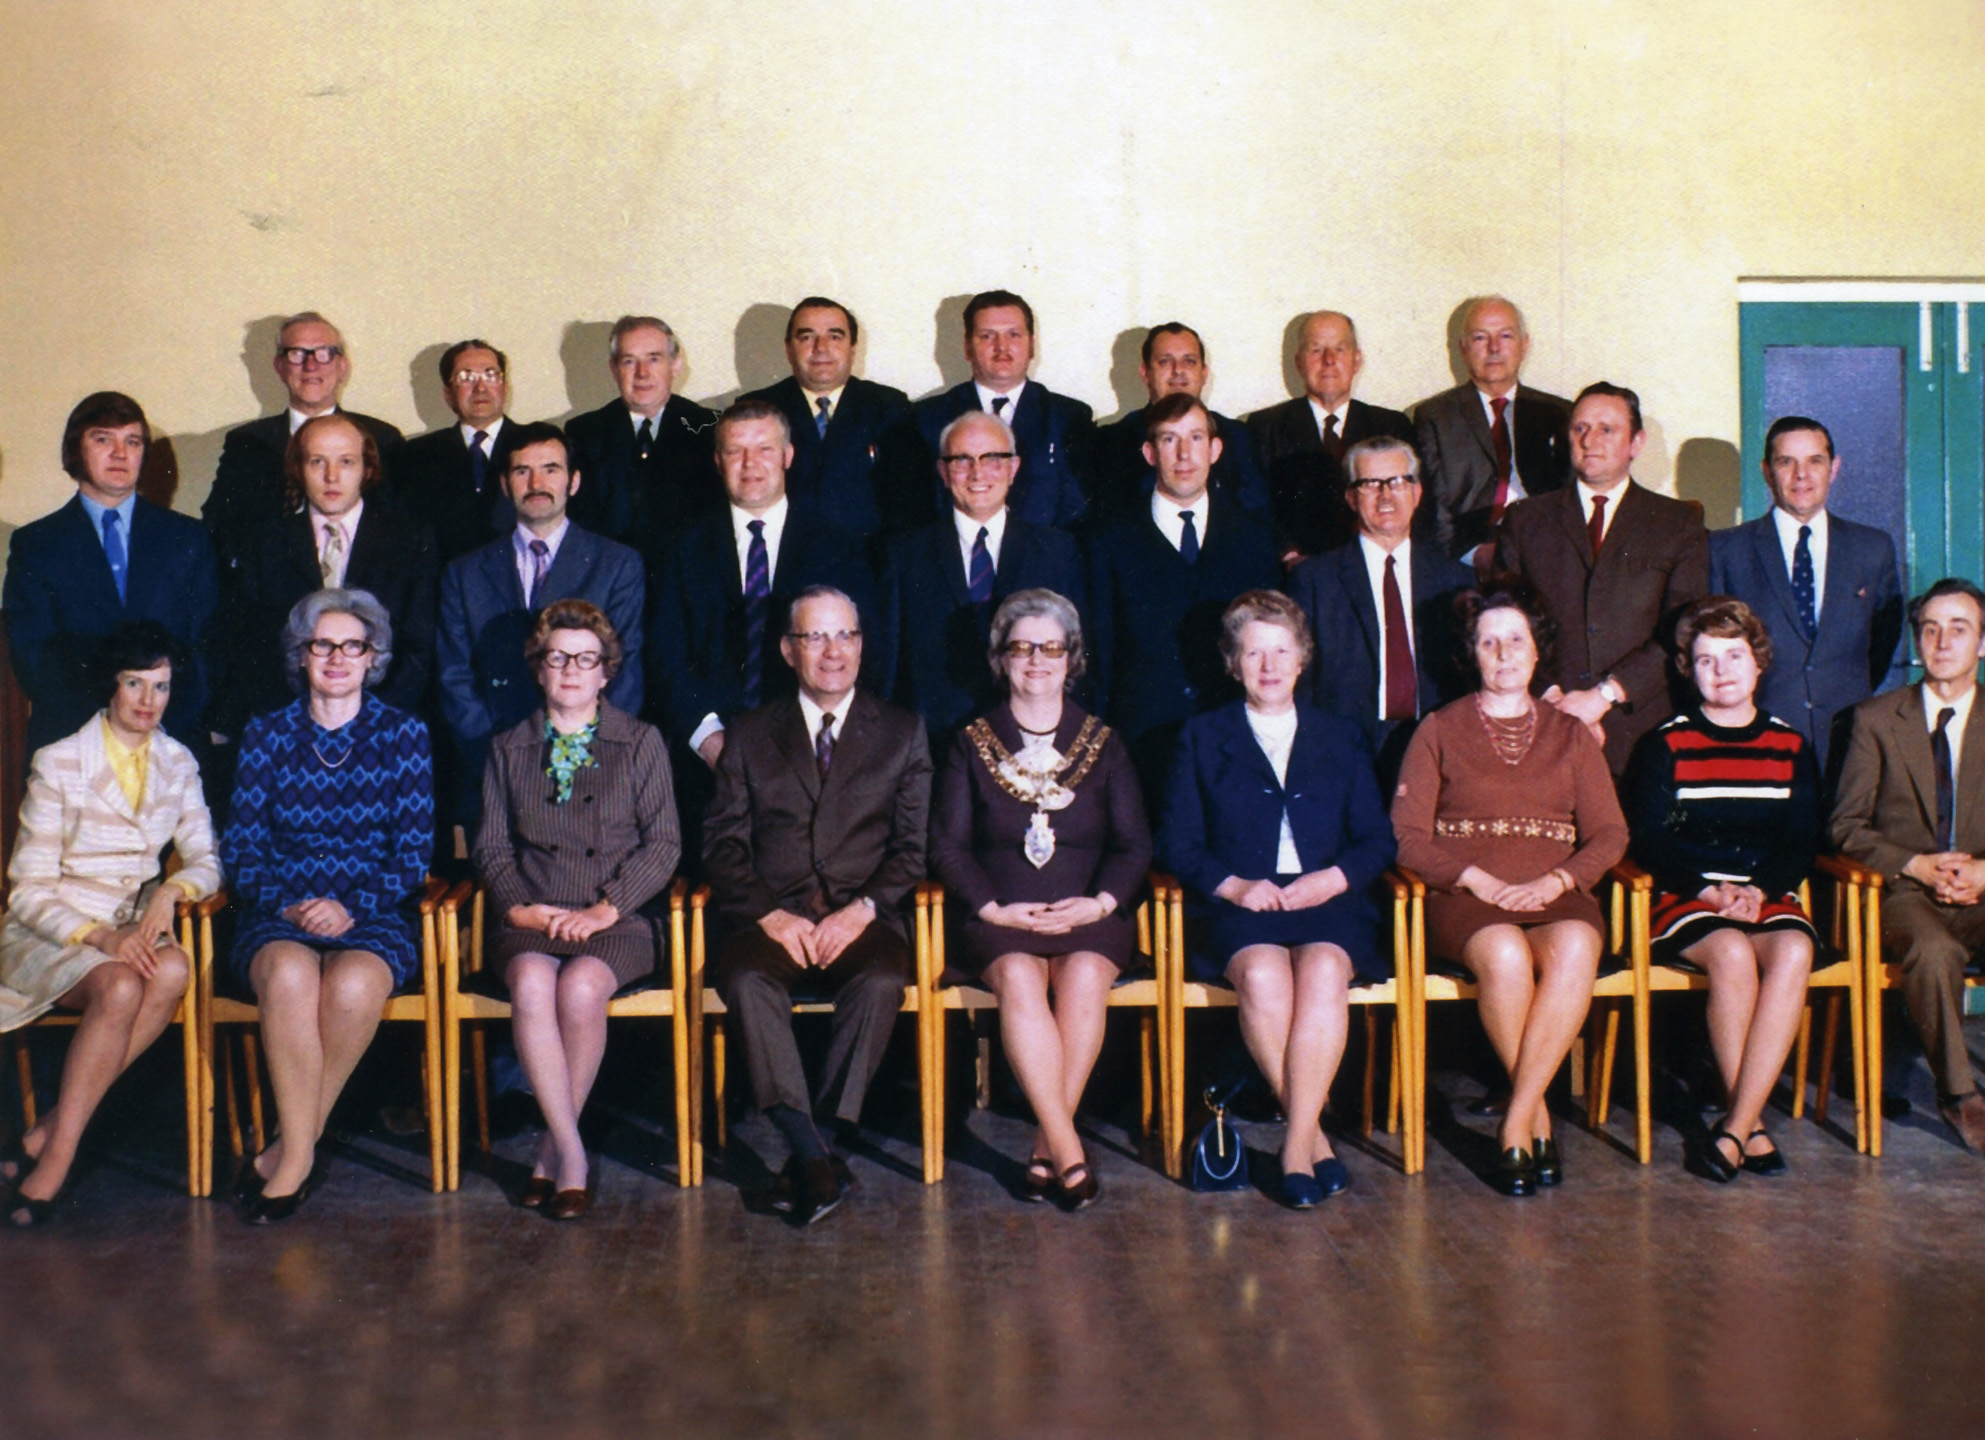 Photograph of Rothwell Council - Frank can be seen in the center of the second row